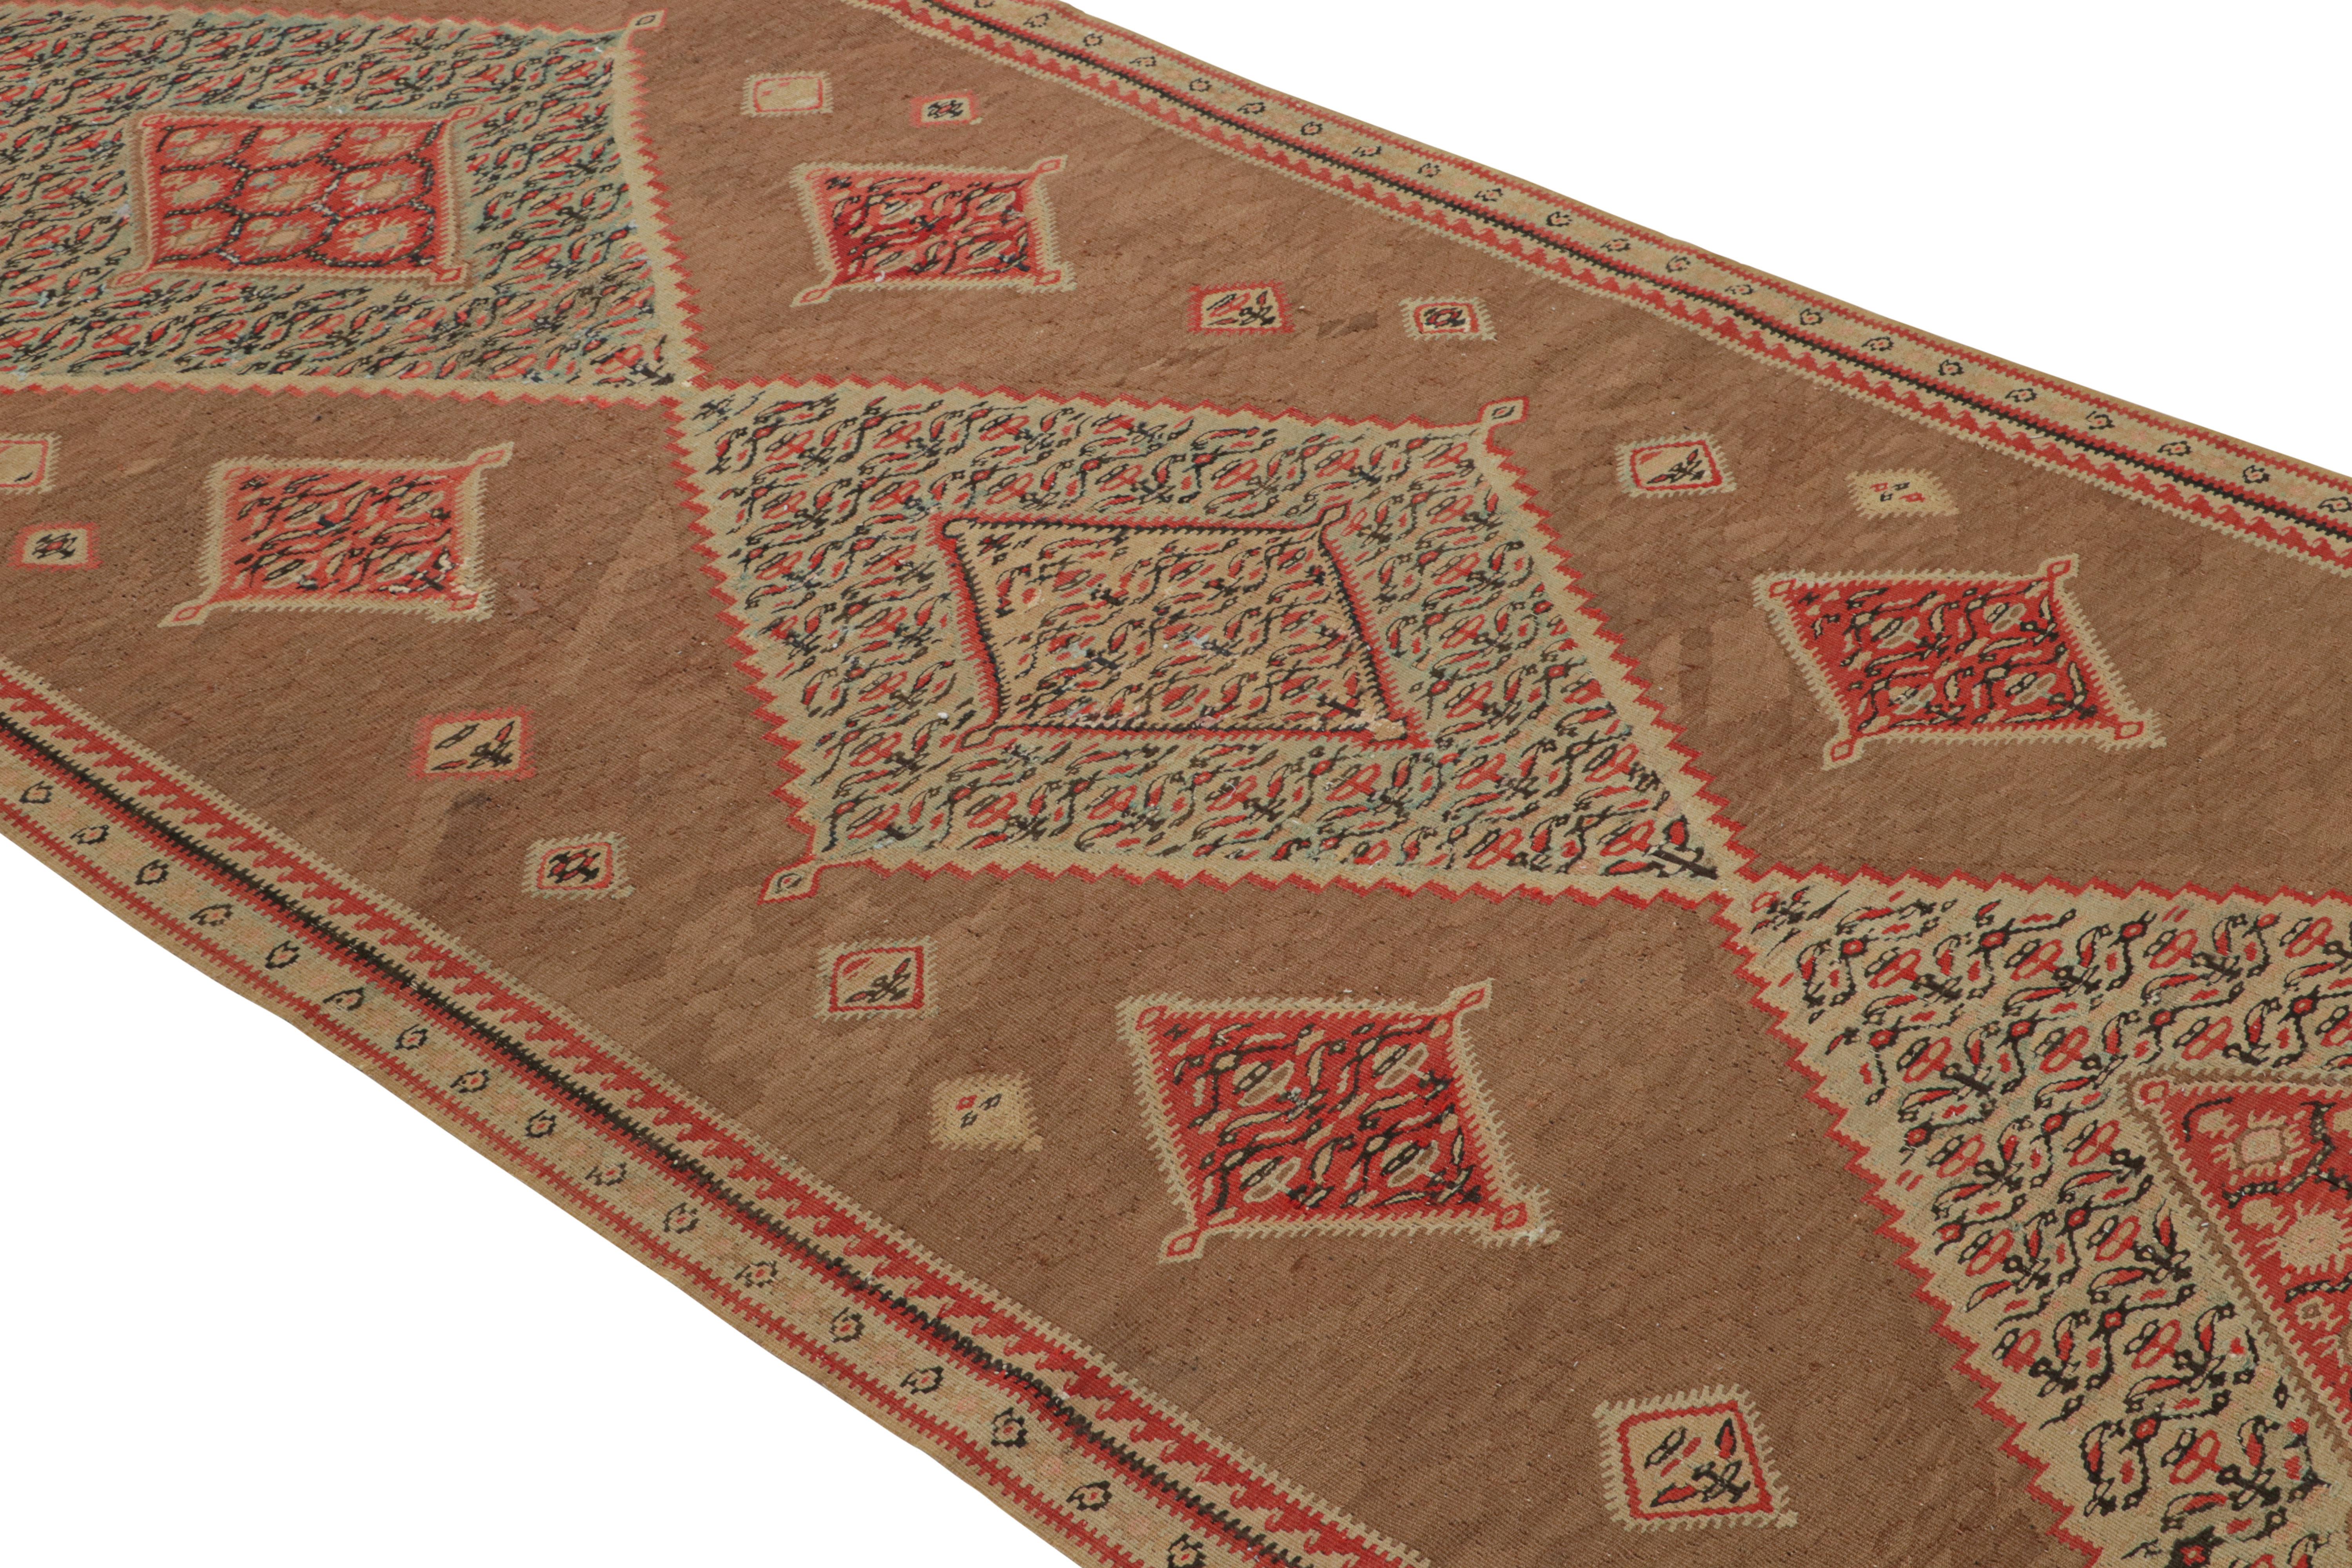 Originating from Persia in (year), this (antique/vintage) hand knotted wool Senneh Persian kilim hosts a perfectly mirrored series of diamond motifs recapturing the rustic red and beige brown colourways in its field and border, complemented by